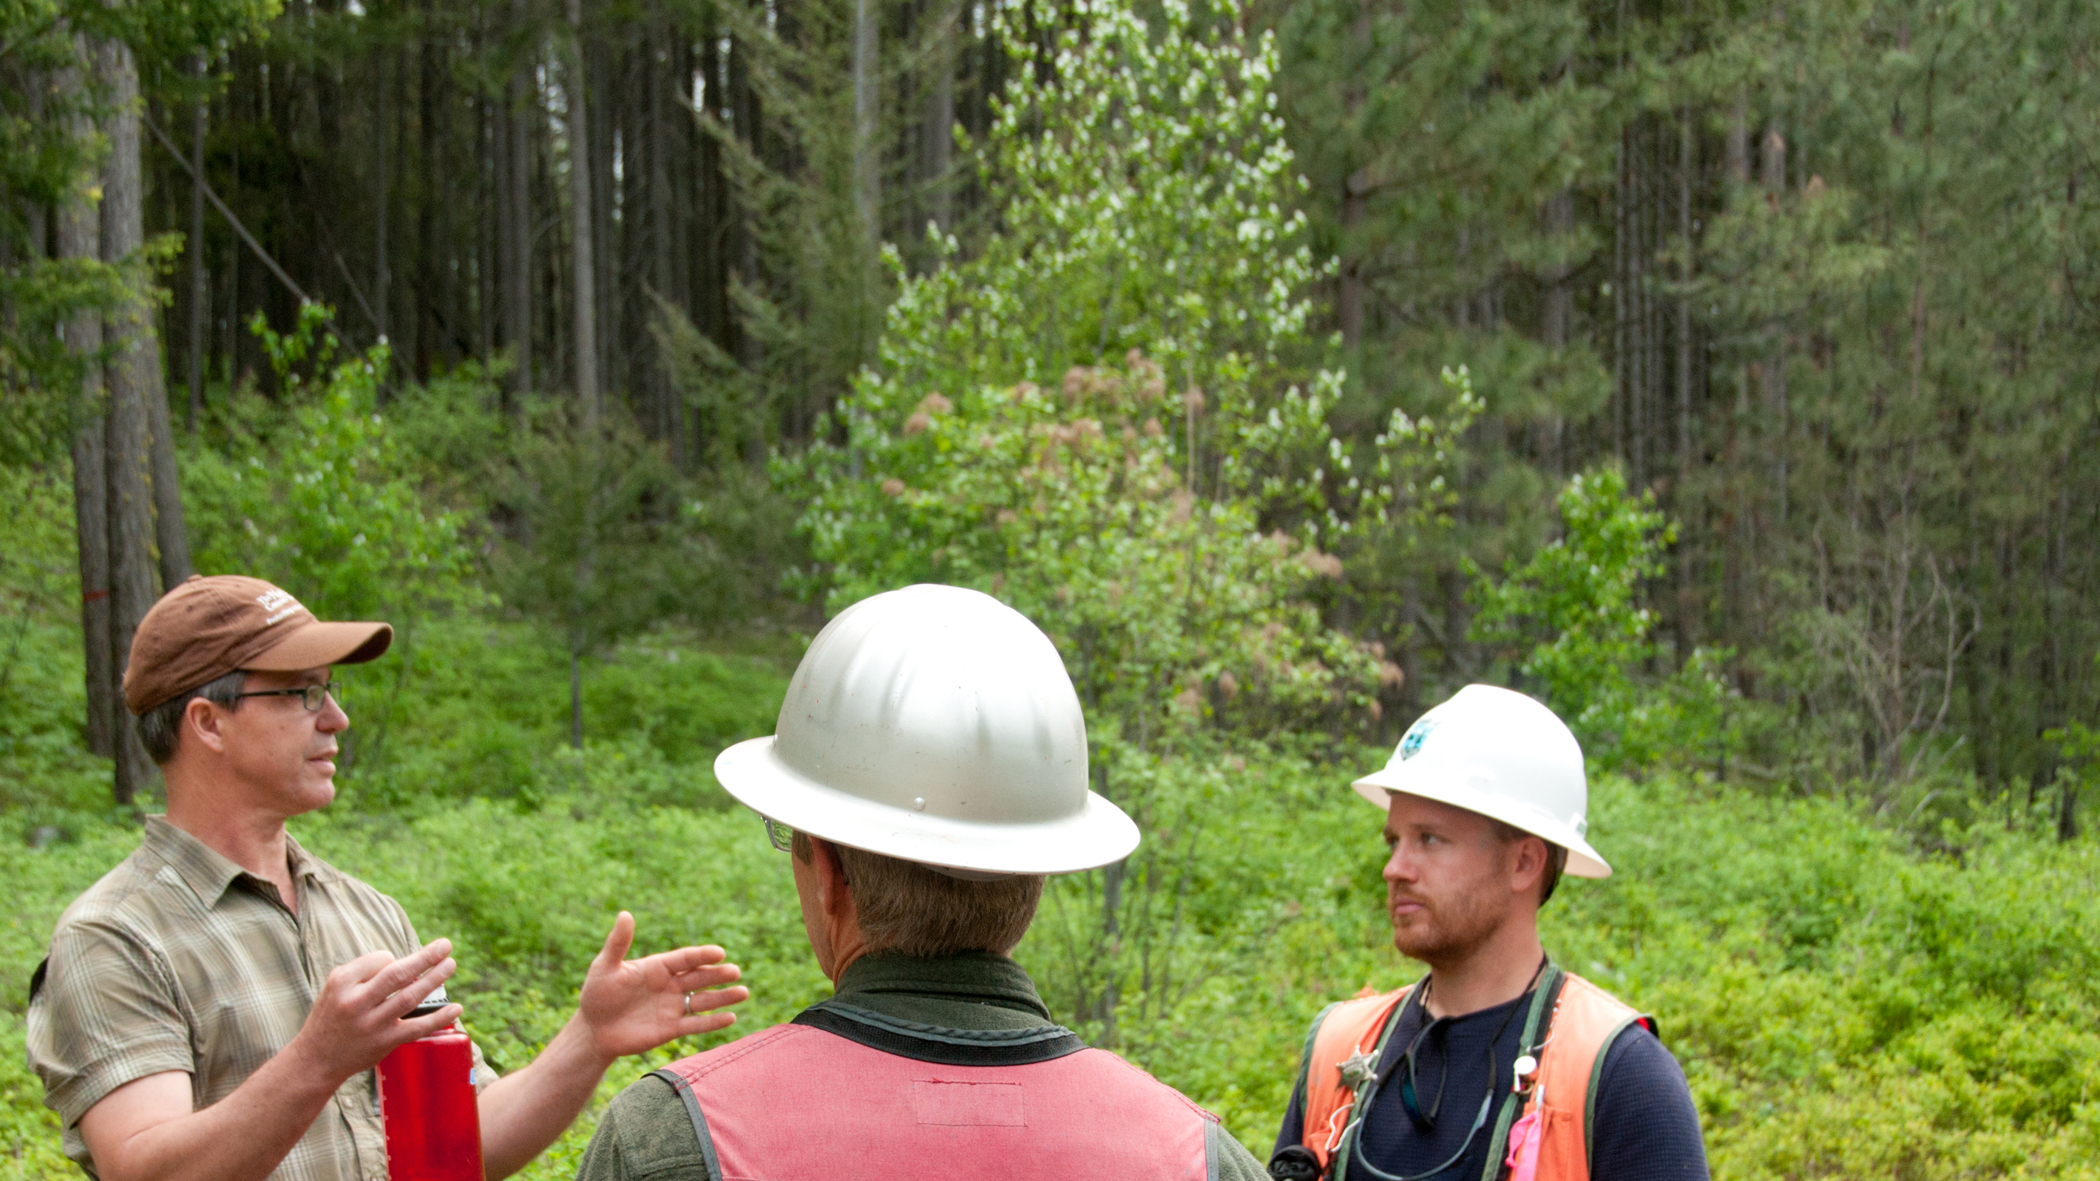 Forestry scientists and practitioners discuss the implementation of an ICO approach. Behind them you can see the dense, relatively young trees. © The Nature Conservancy (Hannah Letinich)